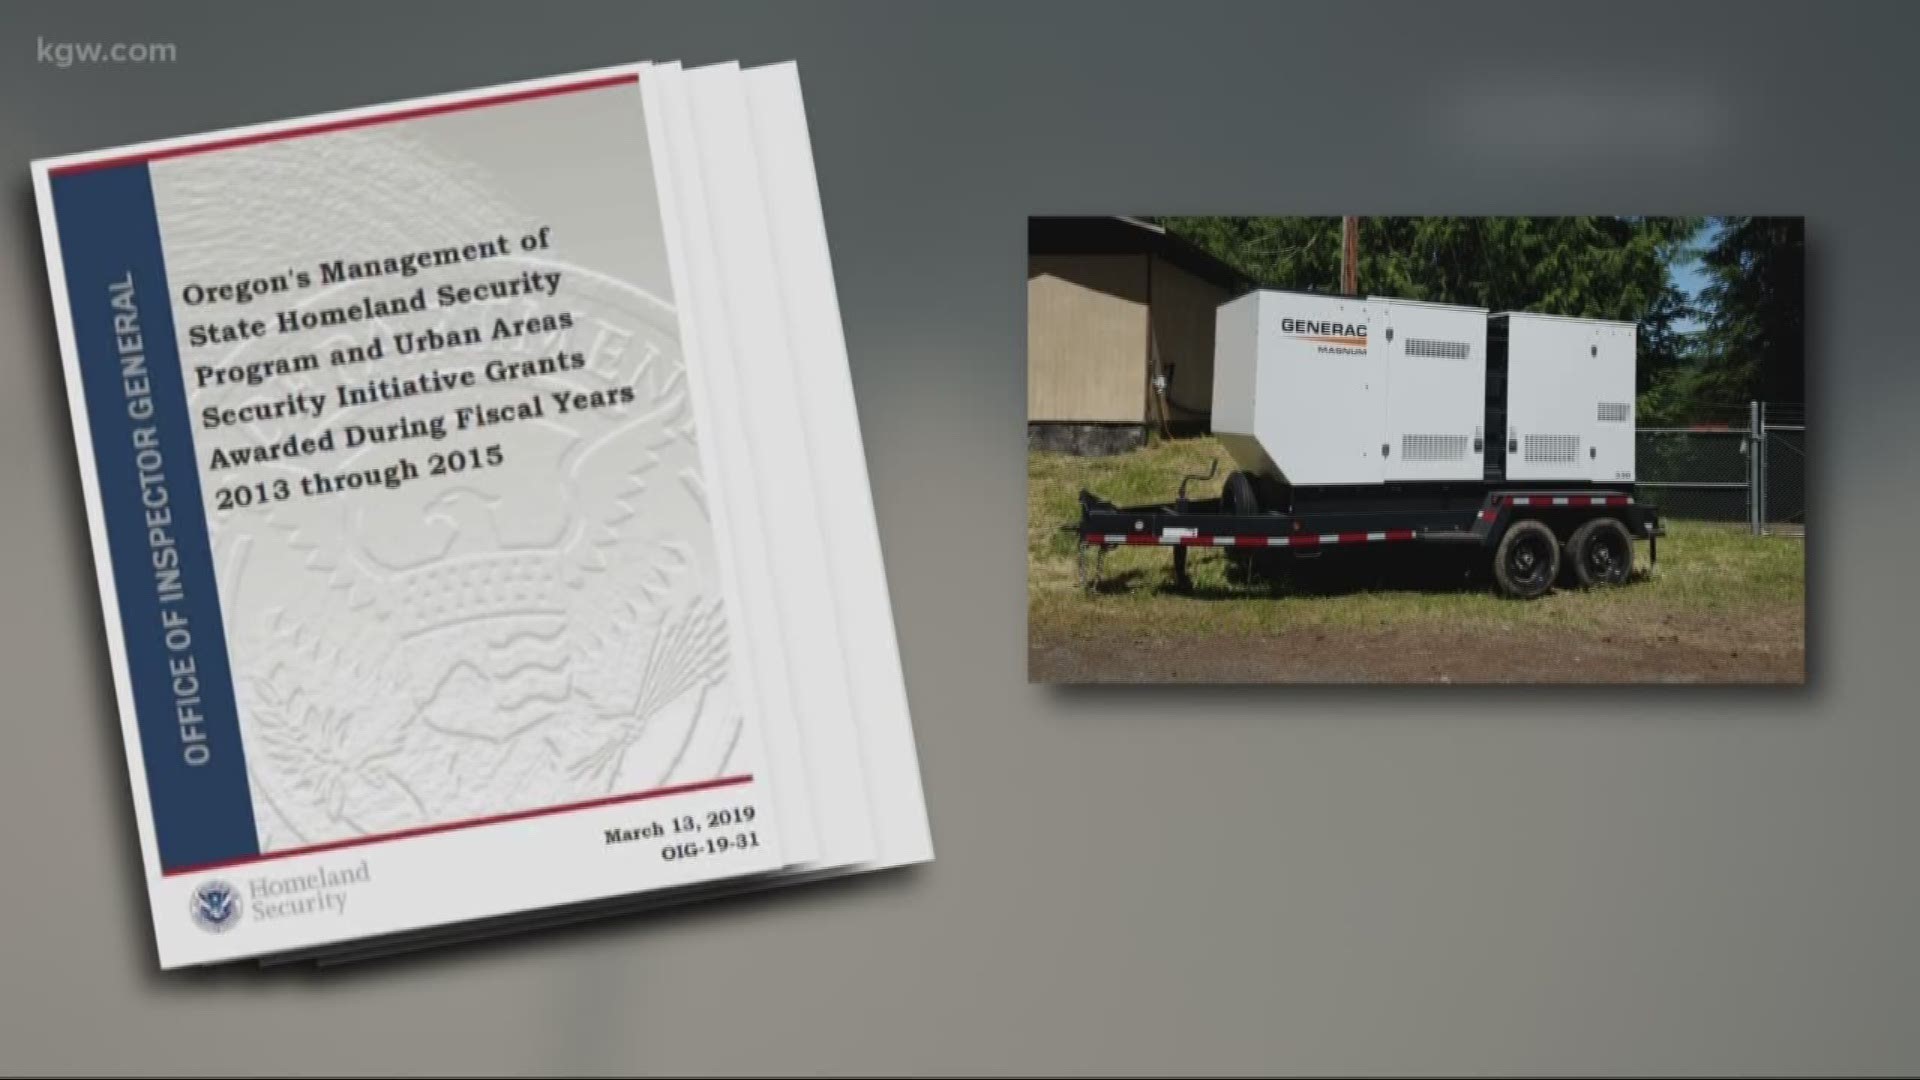 The feds say a $130,000 emergency generator for Oregon disaster response didn’t work.